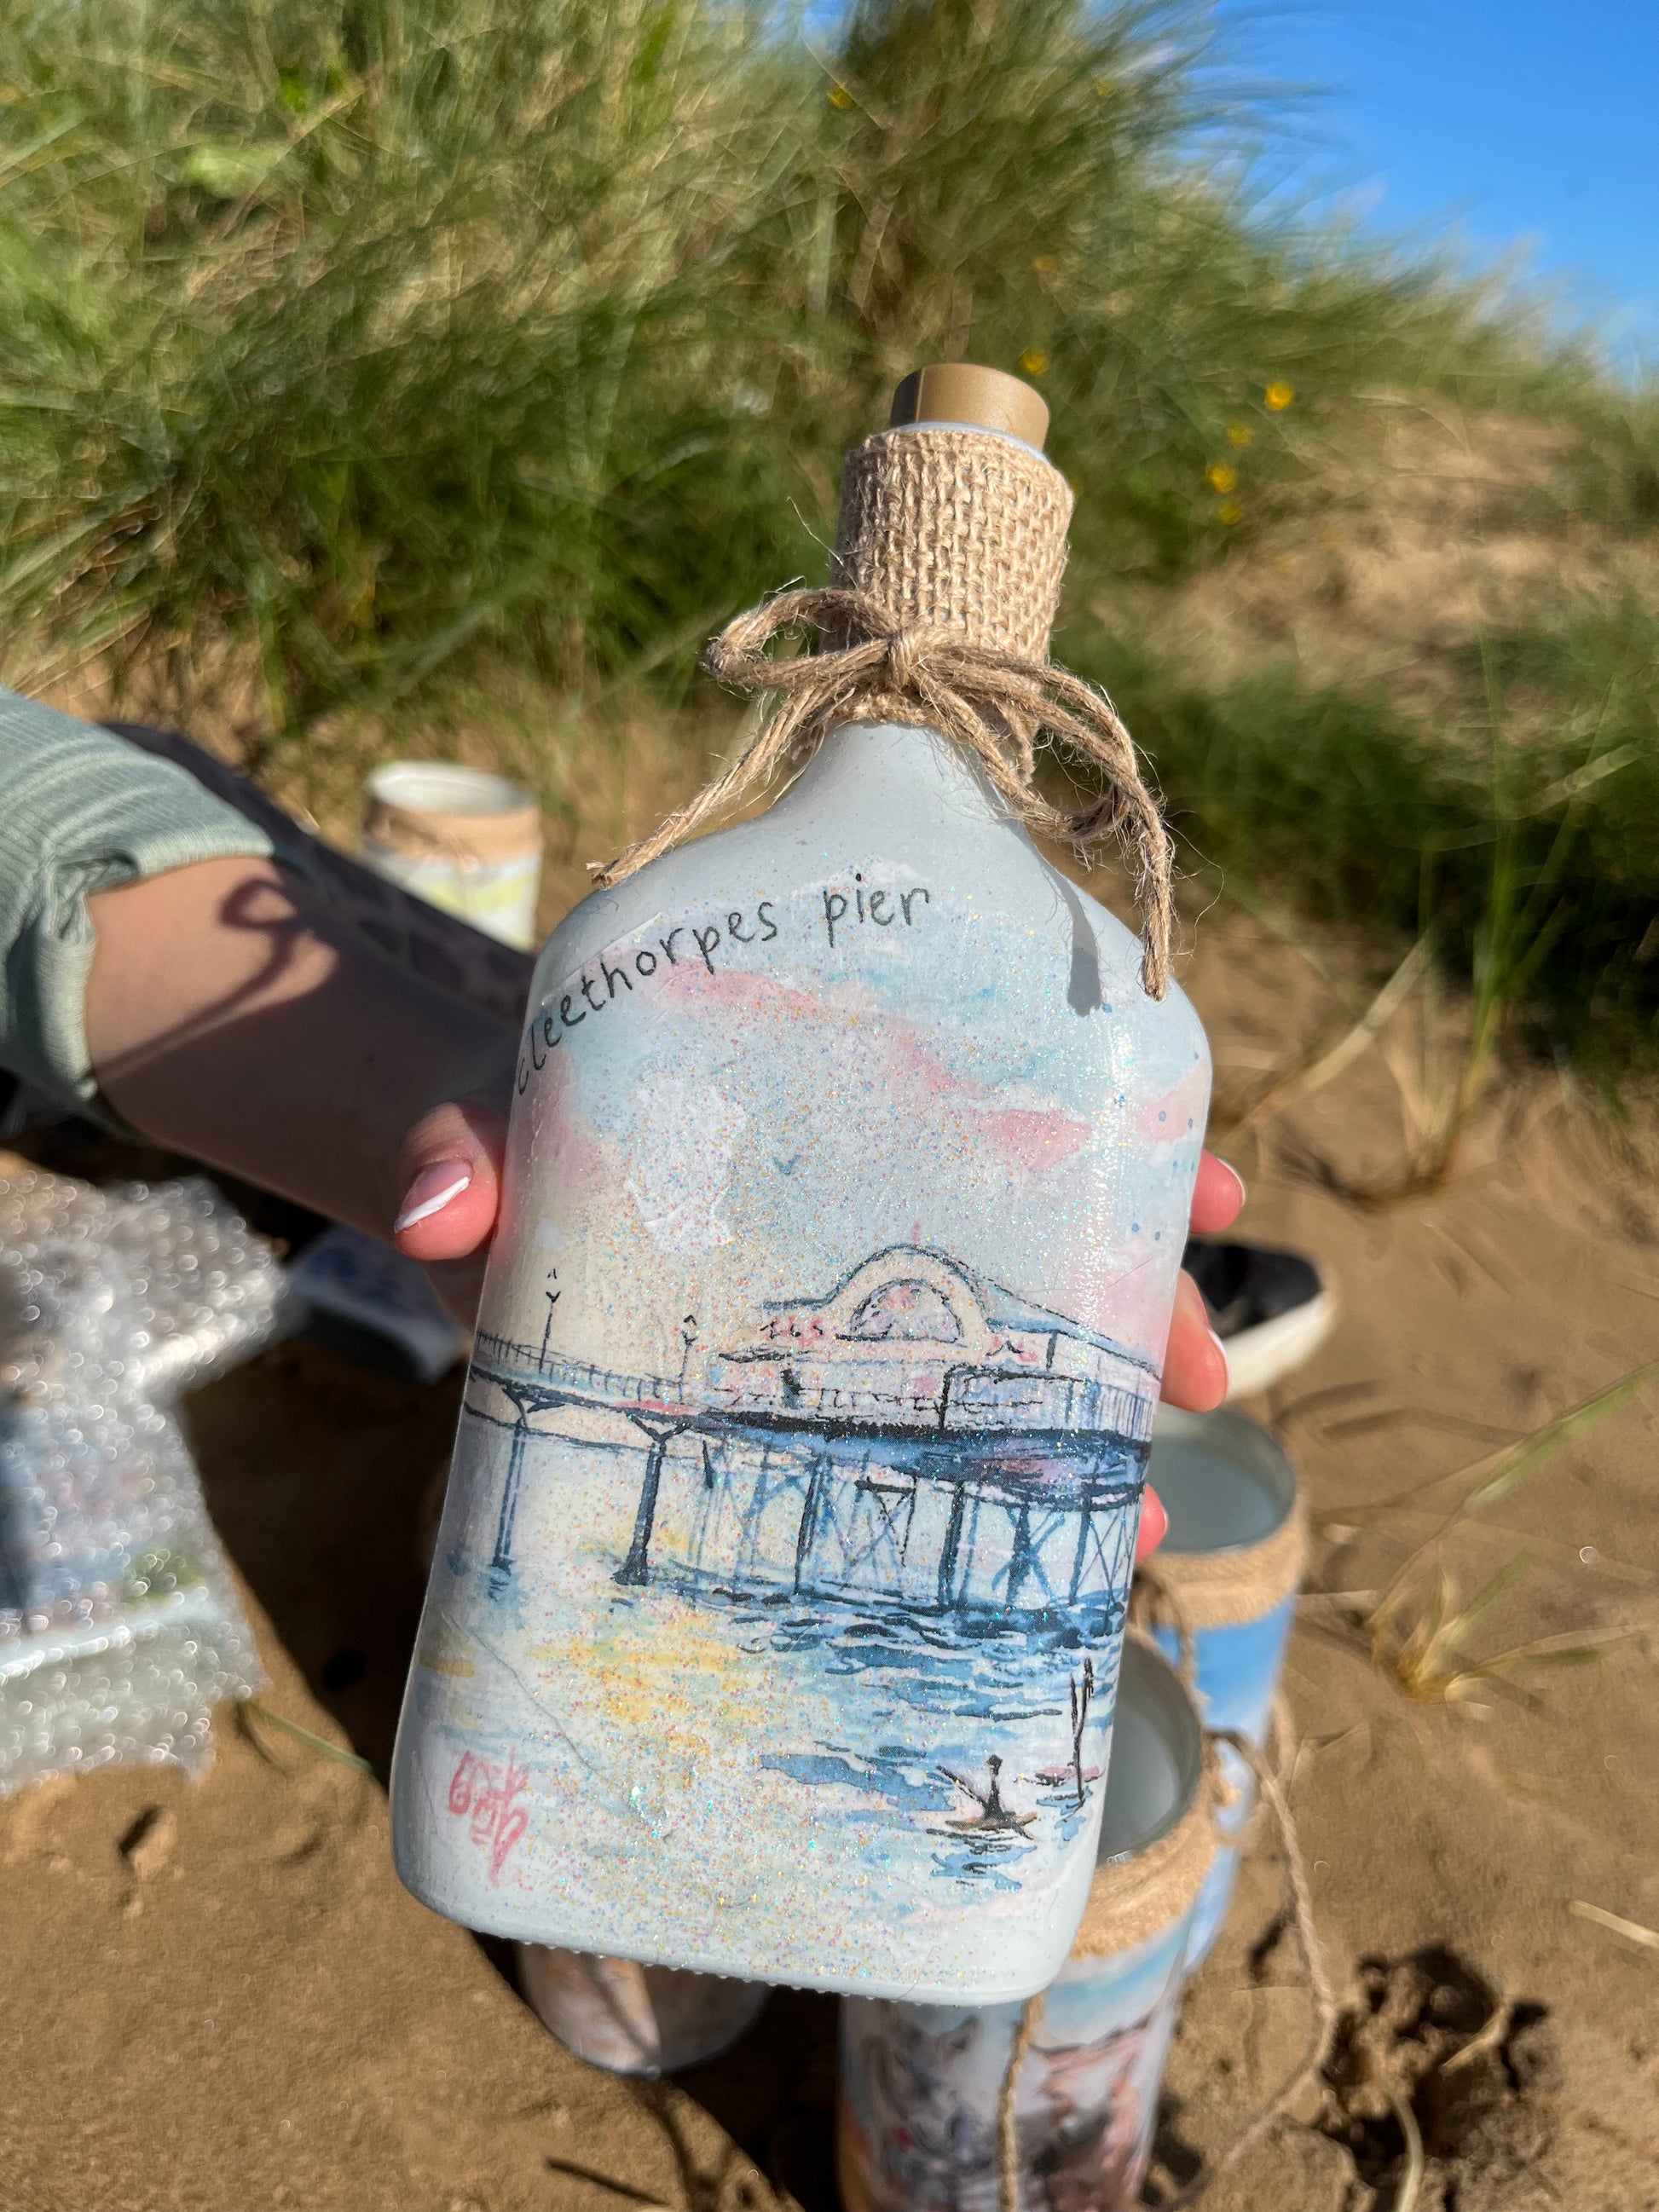 A decoupaged bottle as featuring watercolour artwork of the Cleethorpes pier by Eve Leoni Smith and Jollypotz.